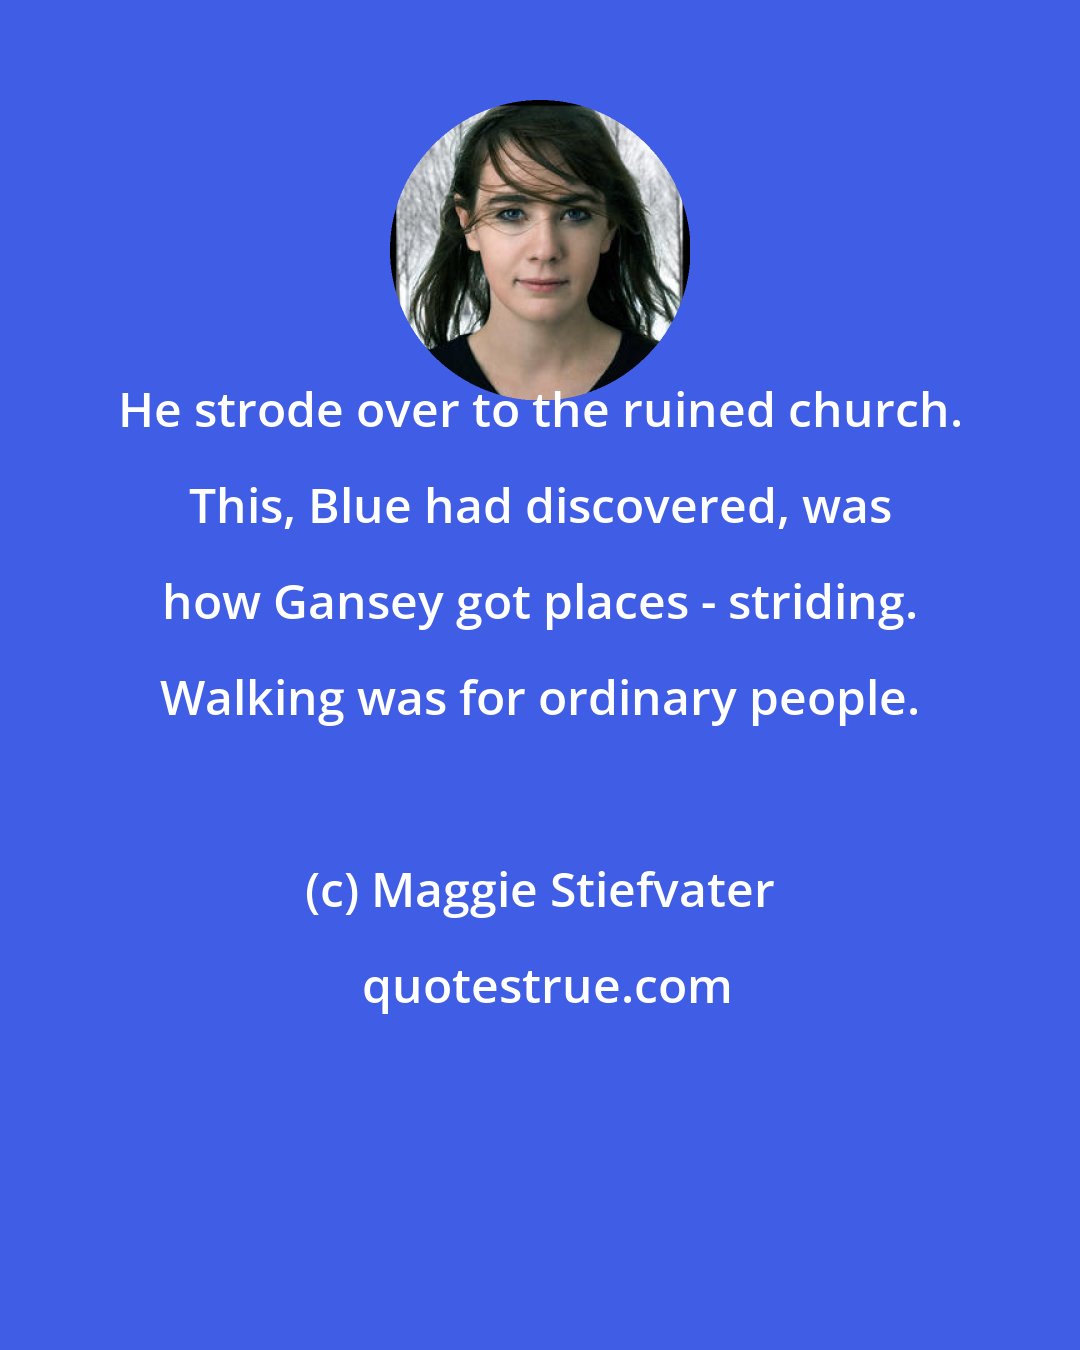 Maggie Stiefvater: He strode over to the ruined church. This, Blue had discovered, was how Gansey got places - striding. Walking was for ordinary people.